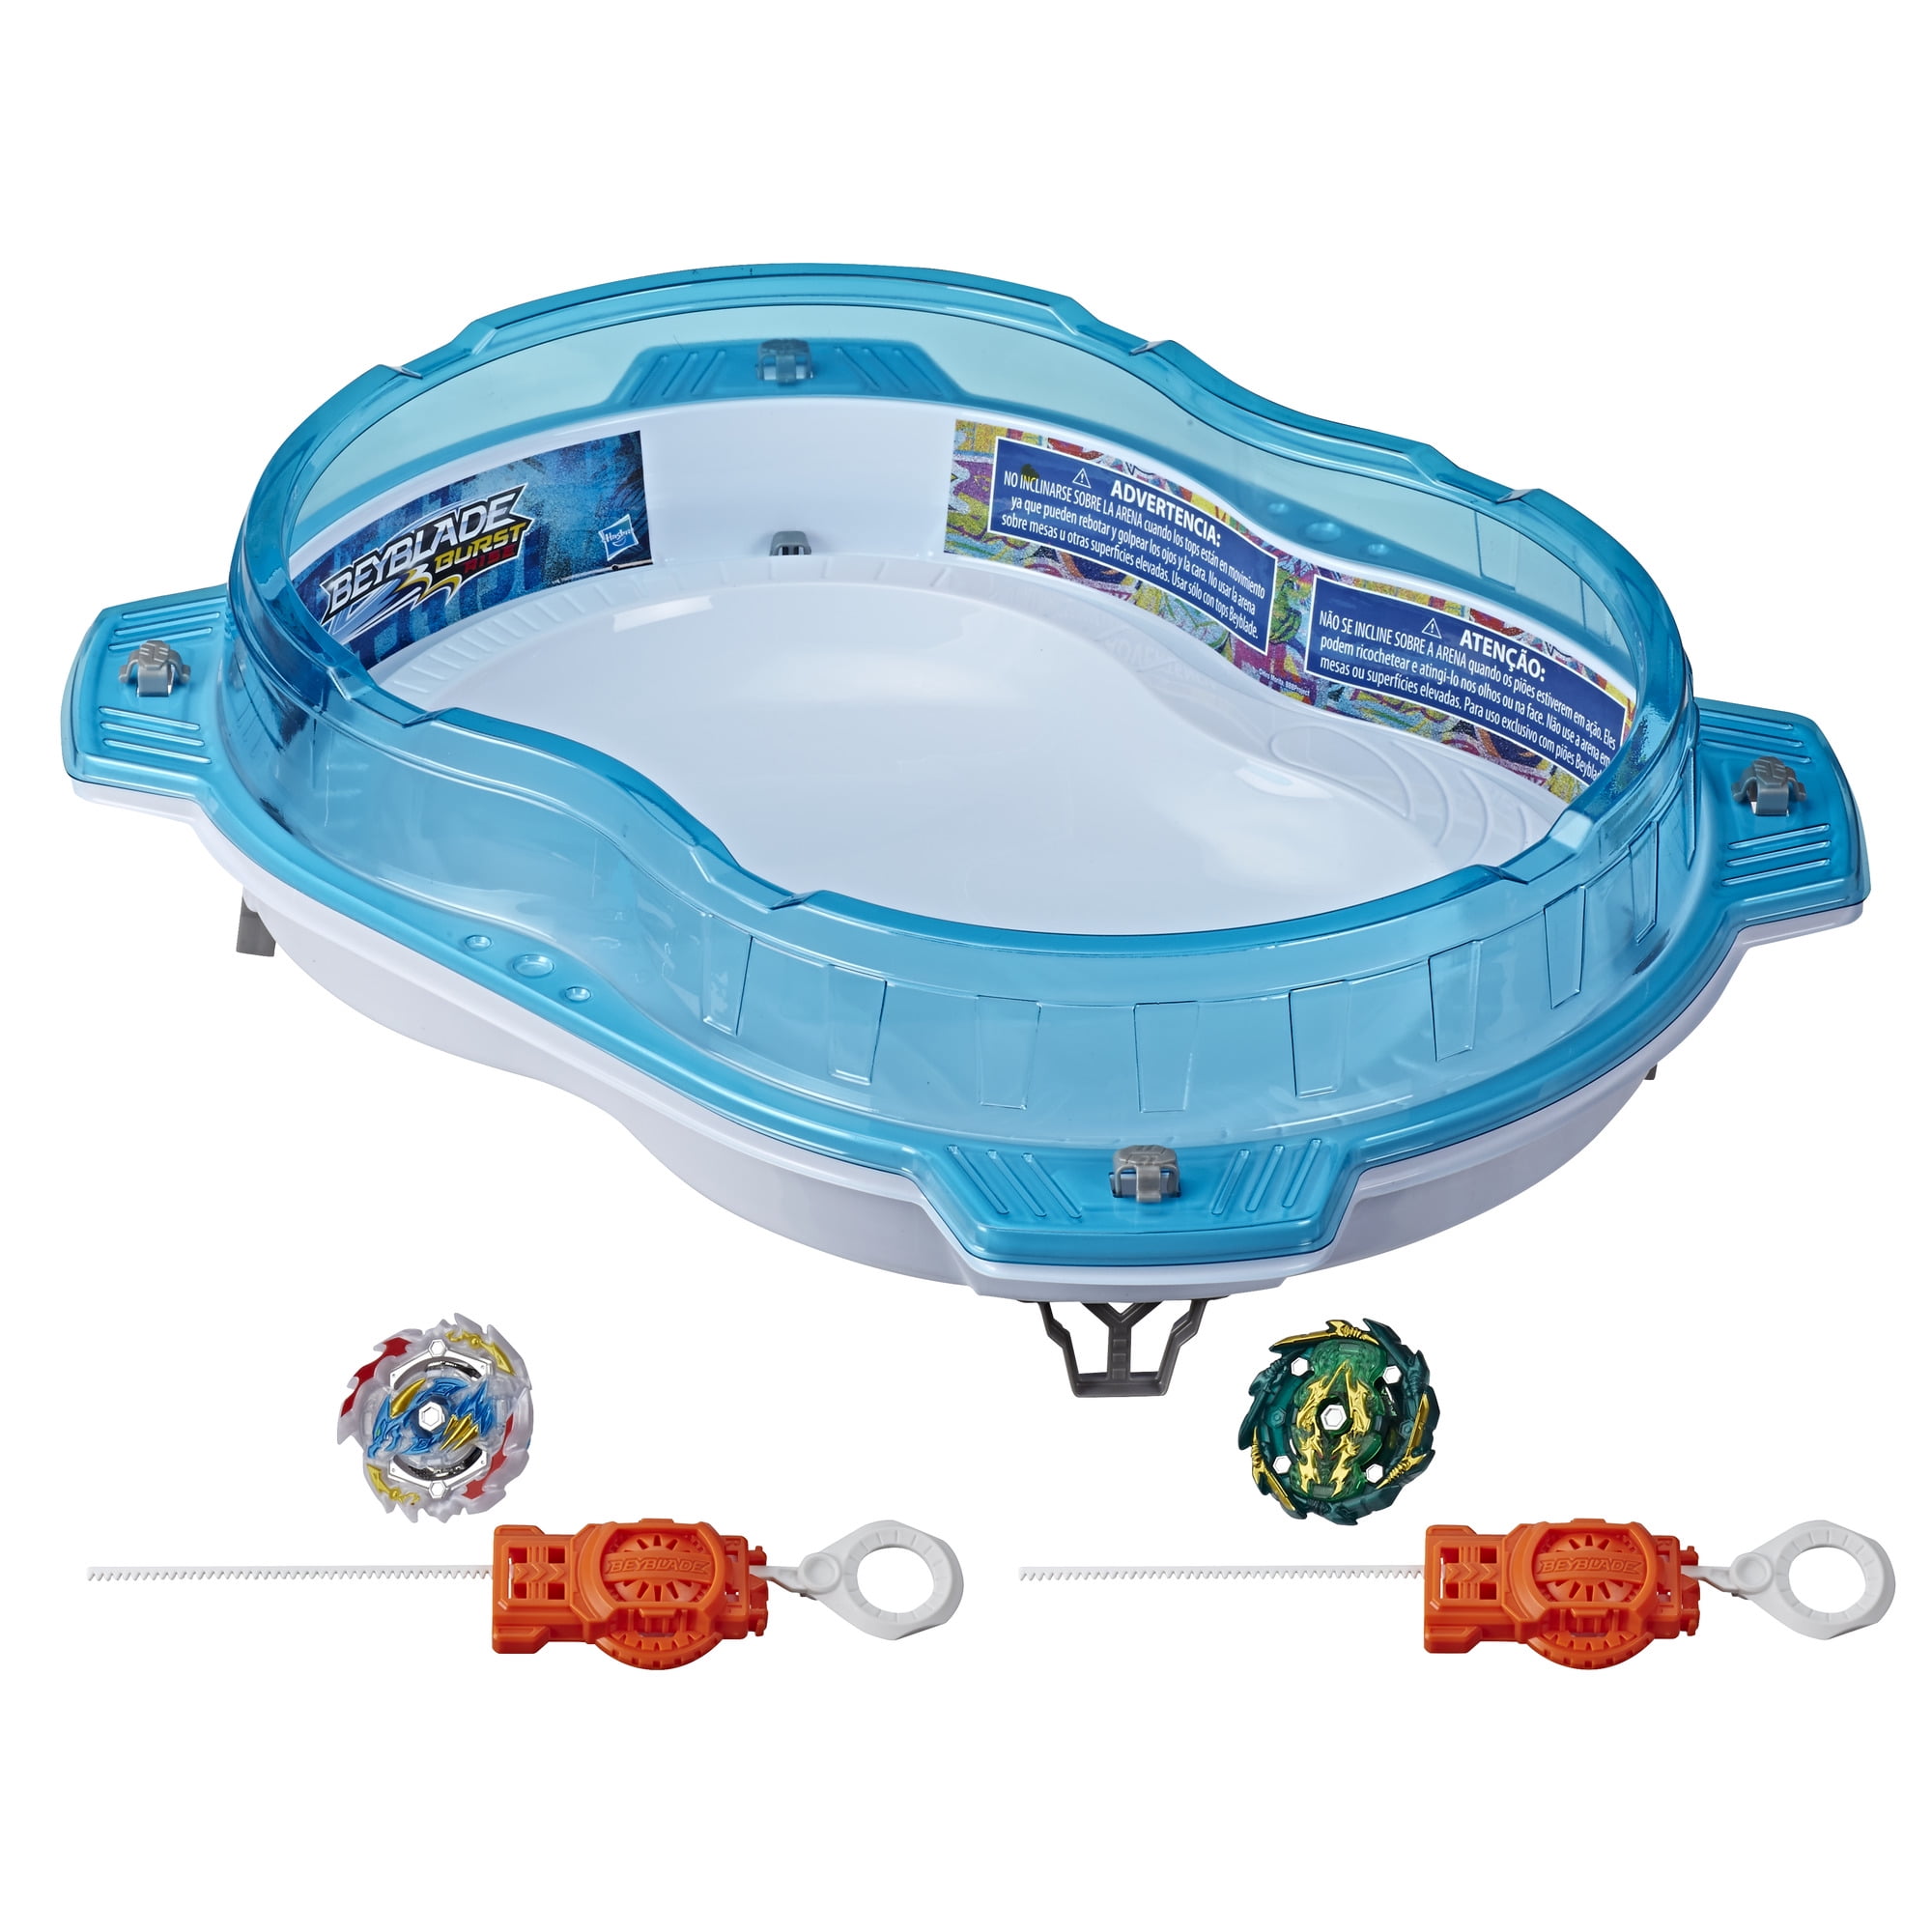 1 pieces lot beyblade arena beyblade stadiums!